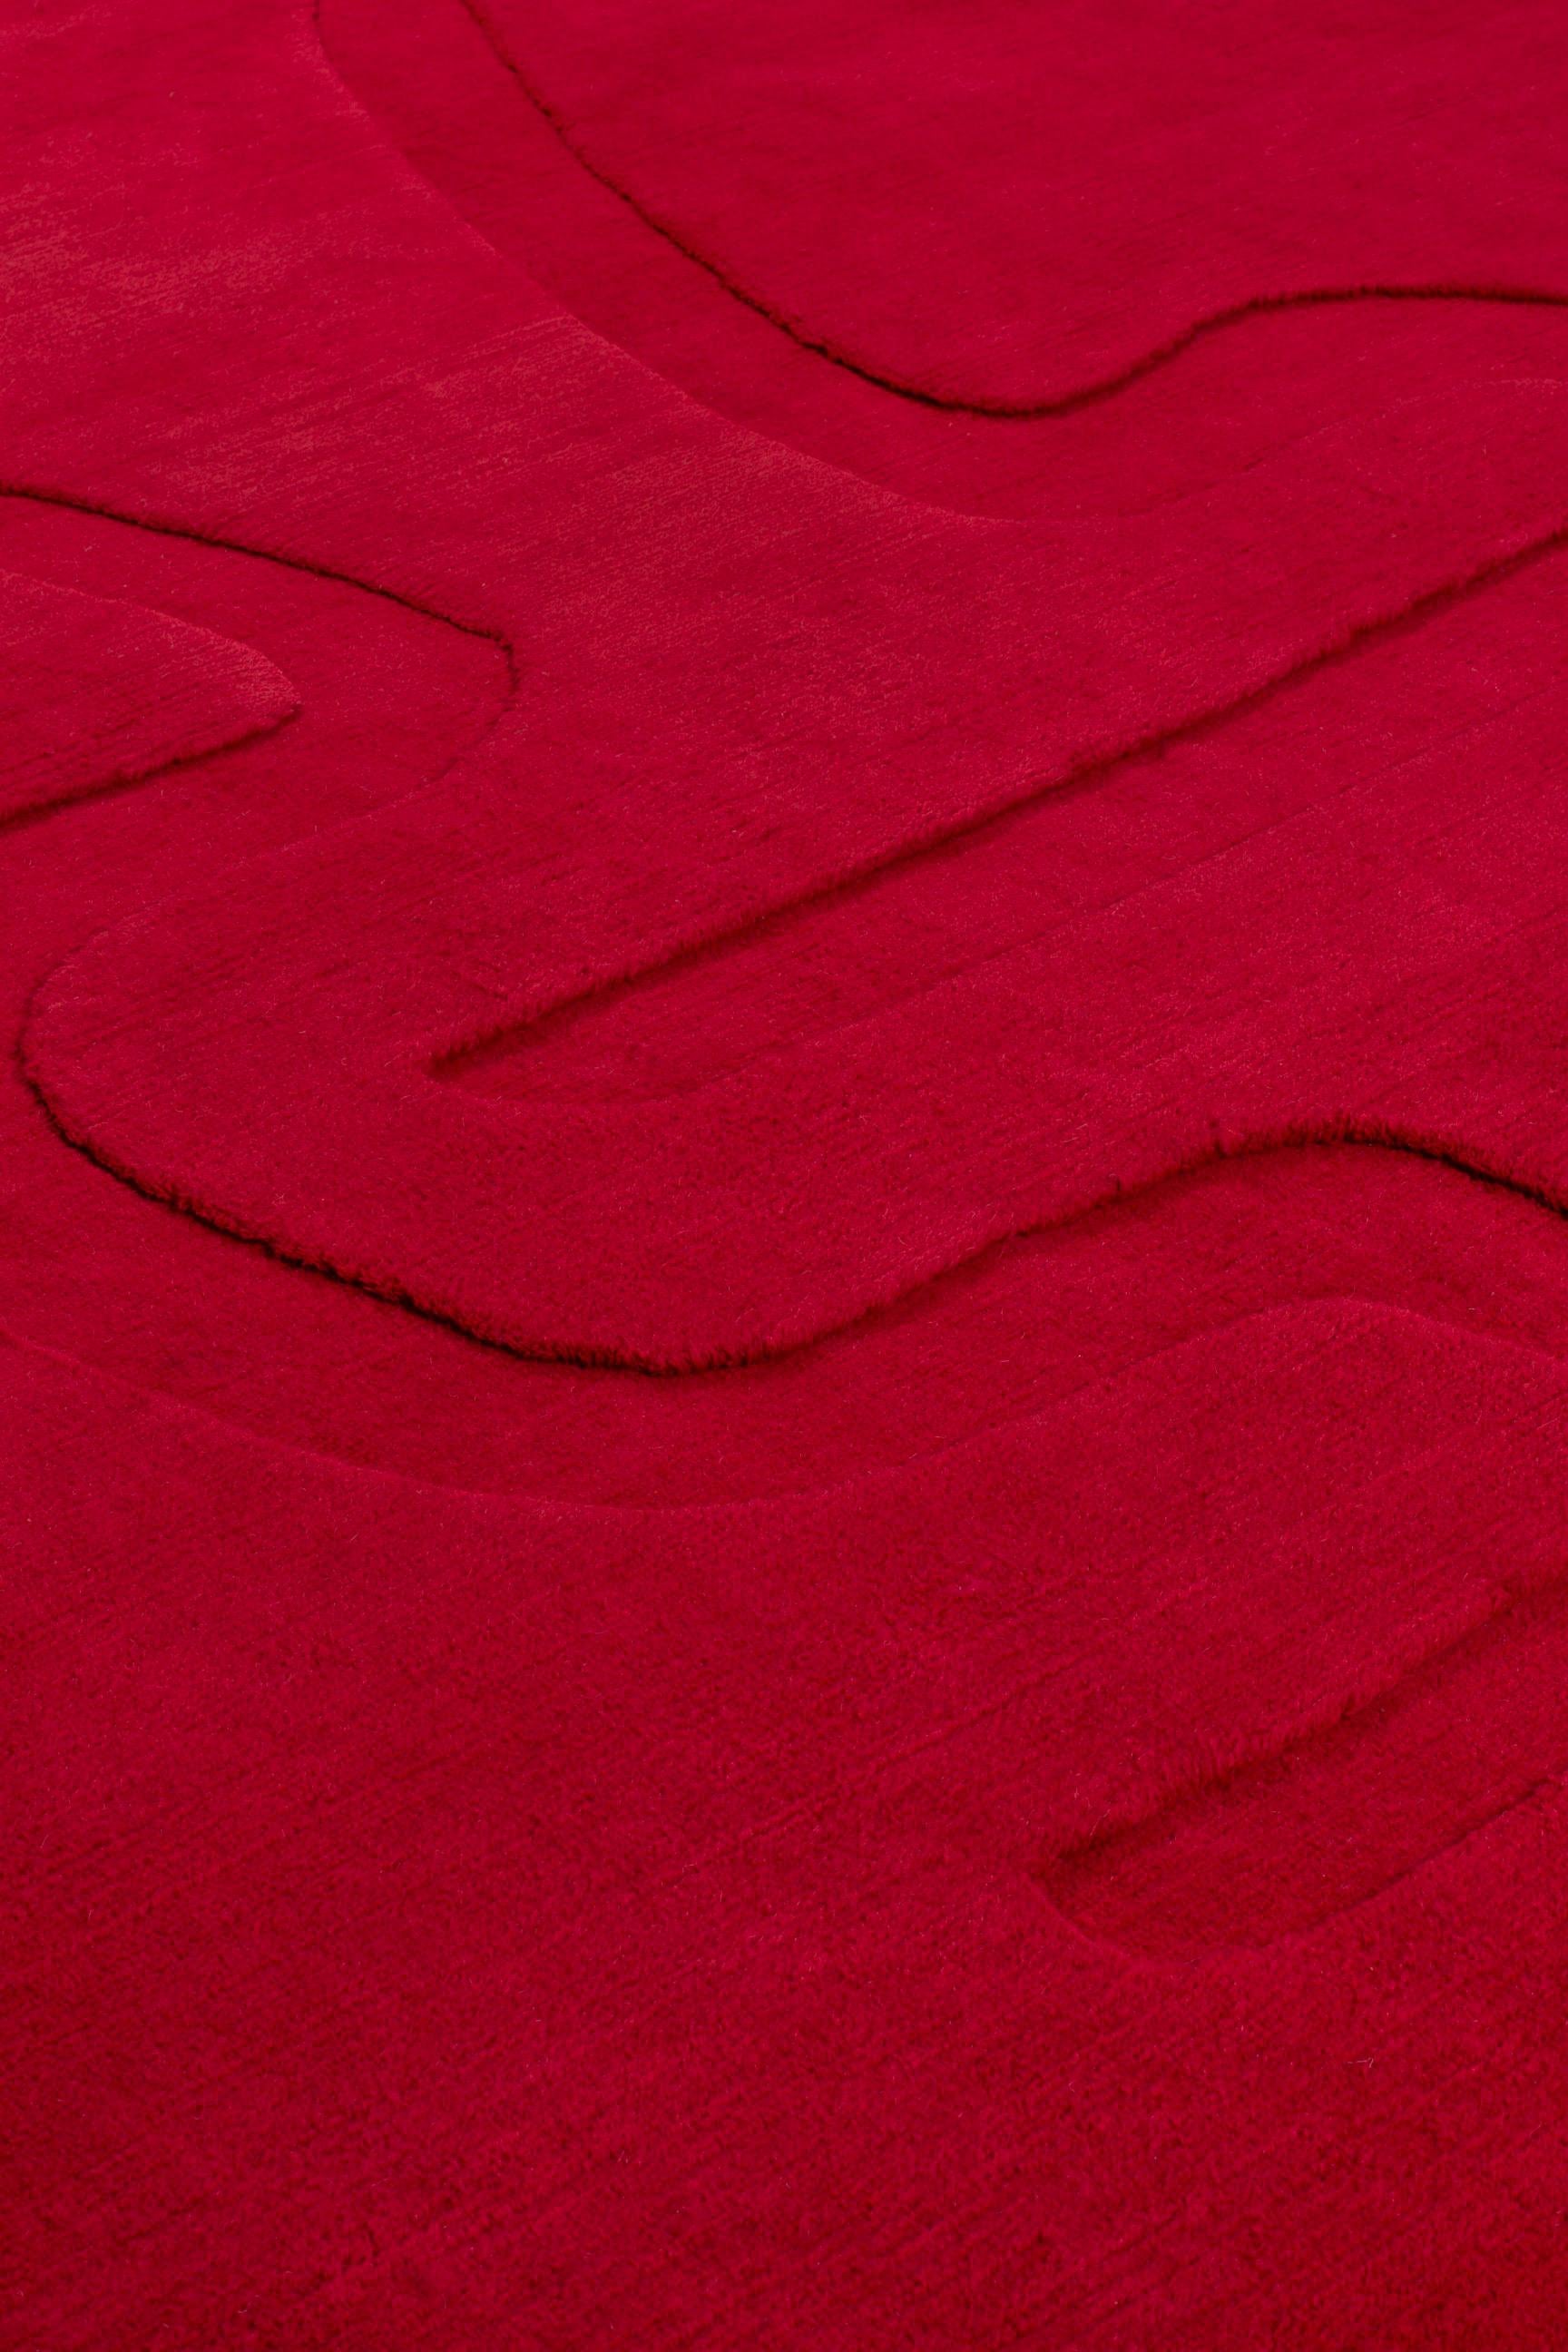 Modern cc-tapis Vérité Rug Cassina Details Collection by Charlotte Perriand For Sale